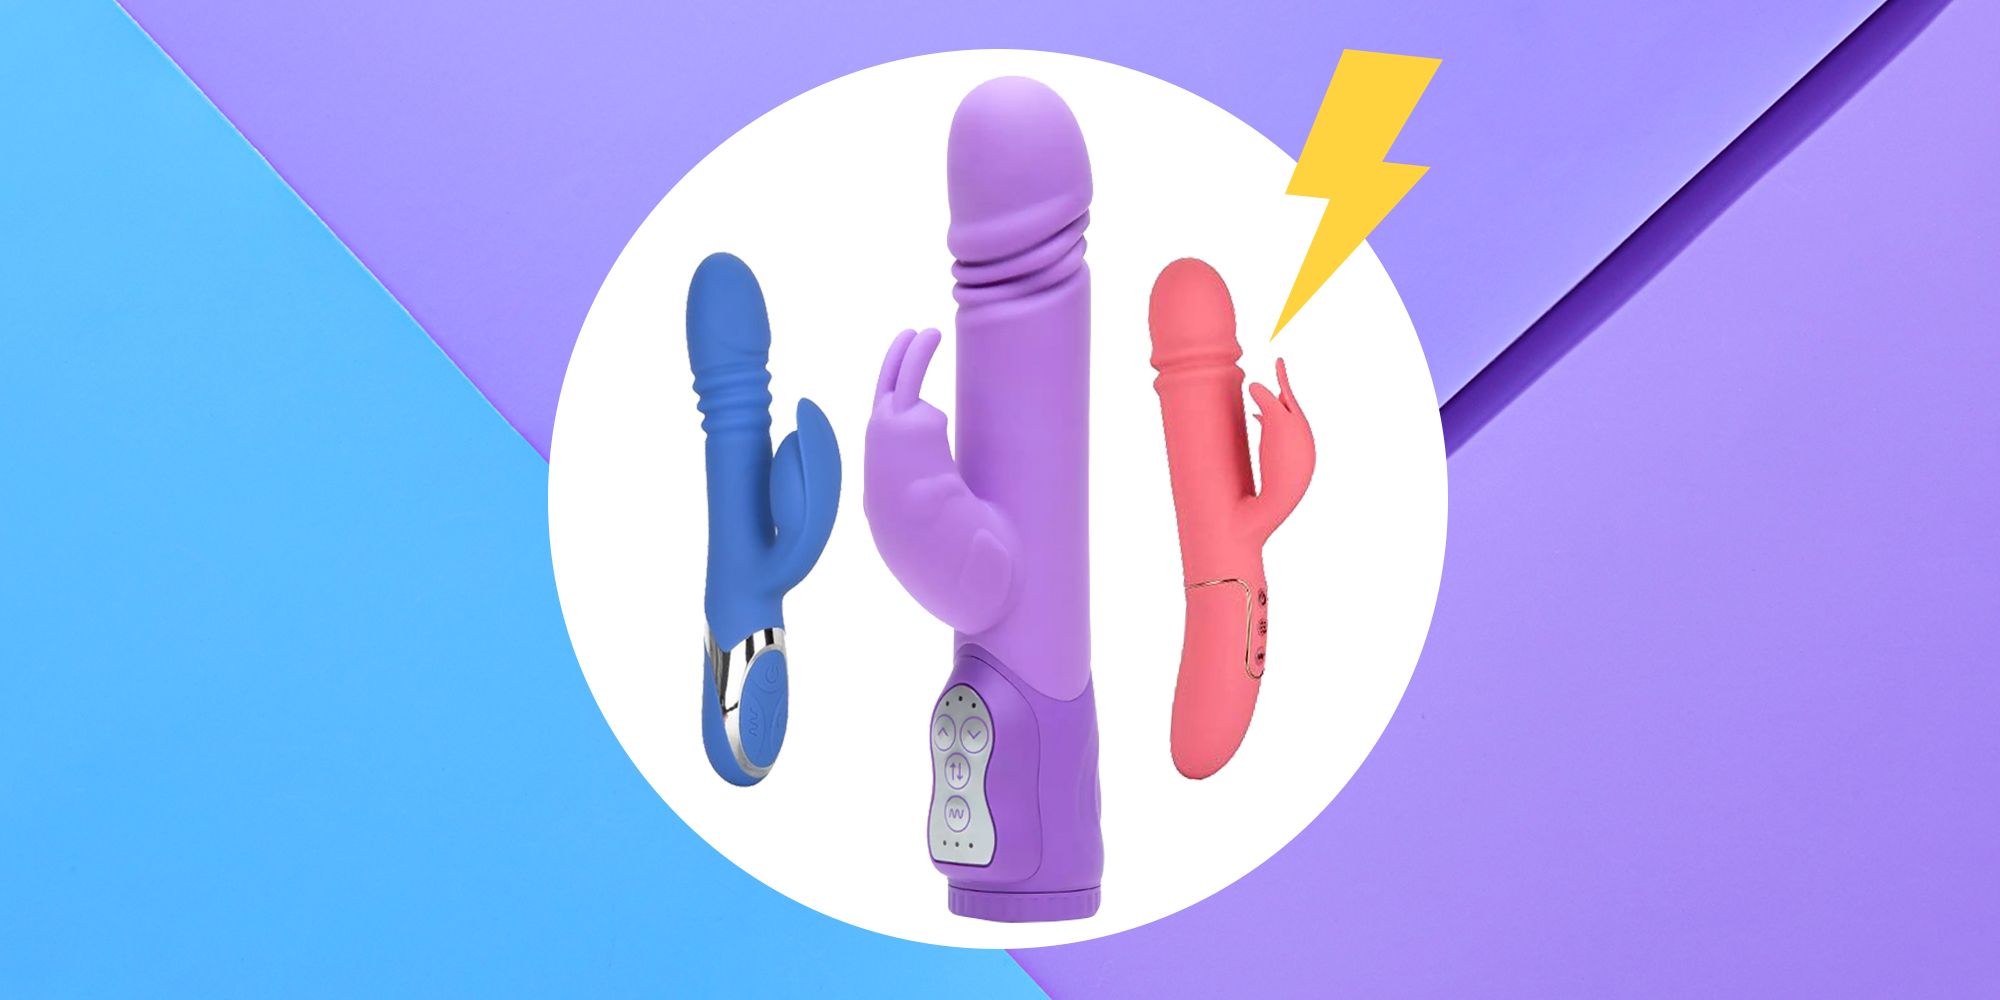 13 Best Thrusting Vibrators, Dildos, and Sex Toys of 2022 pic